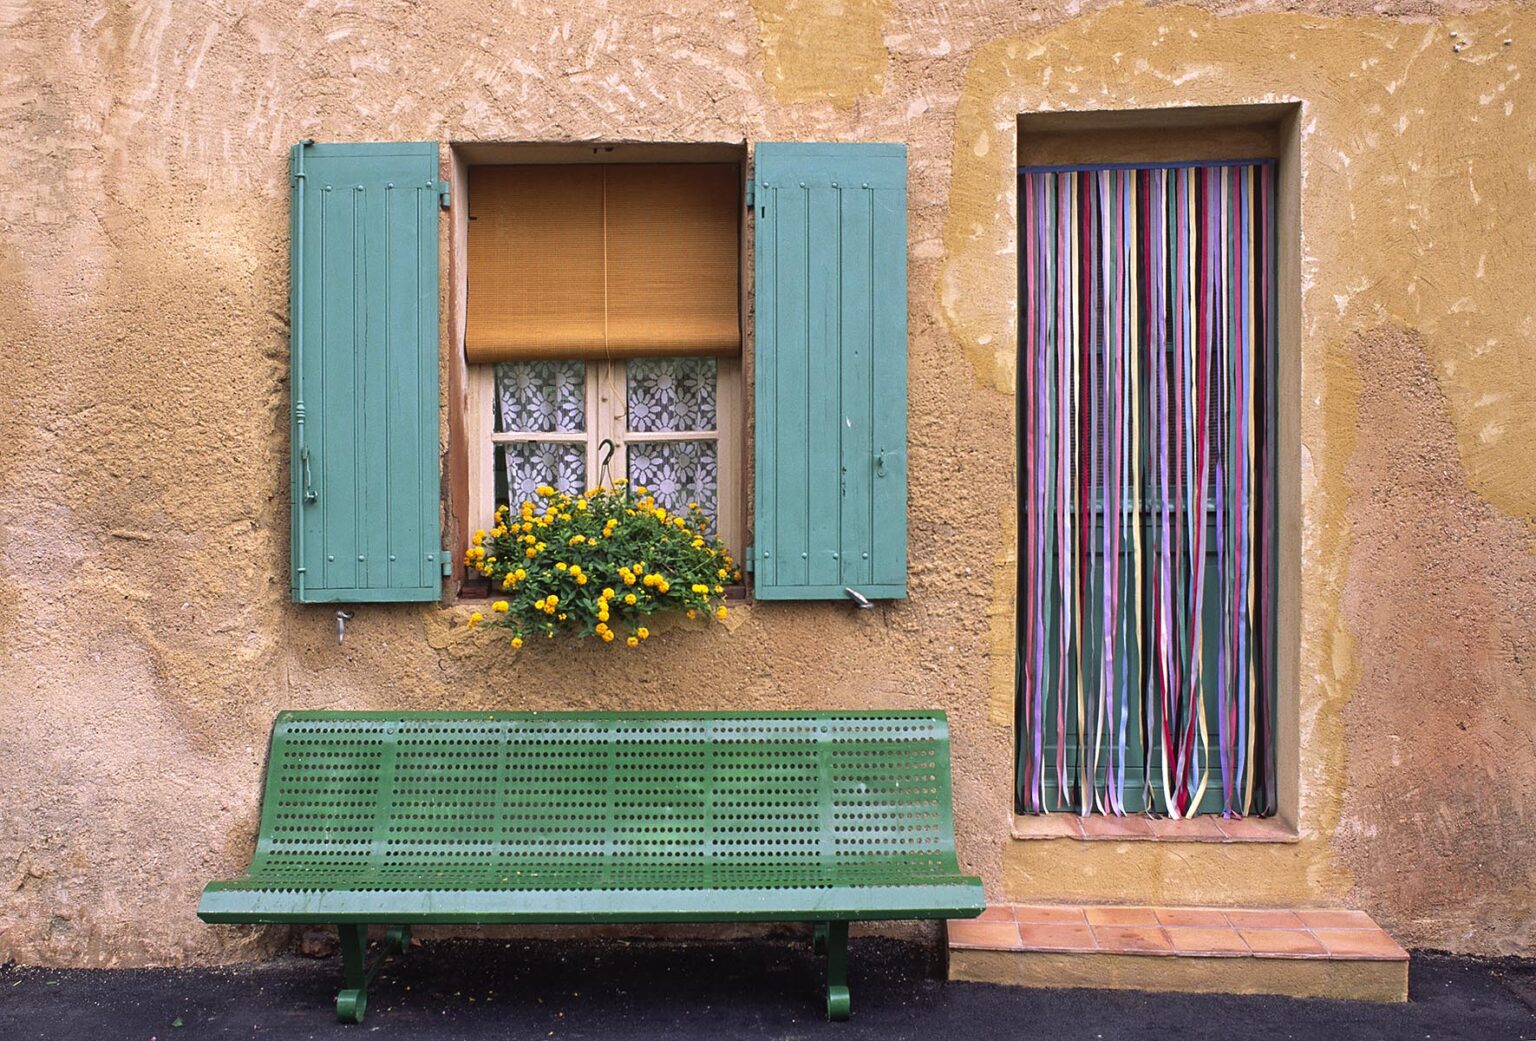 Green bench and window shutters with flowering plant in the Village of ROUSSILLON - PROVENCE, FRANCE